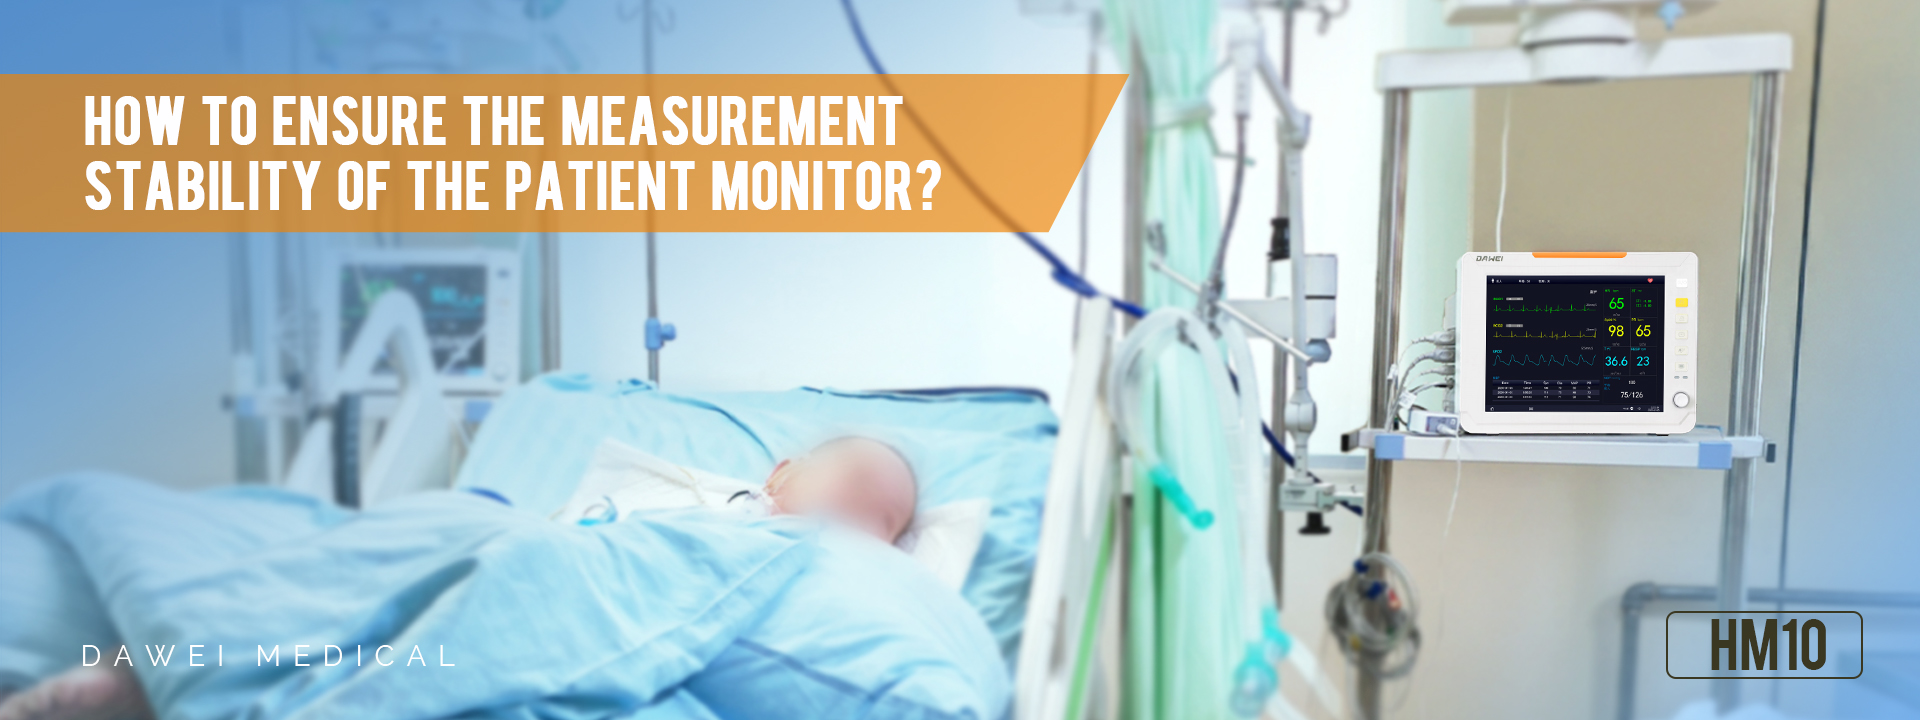 How to Choose a Cost-effective Basic Patient Monitor?